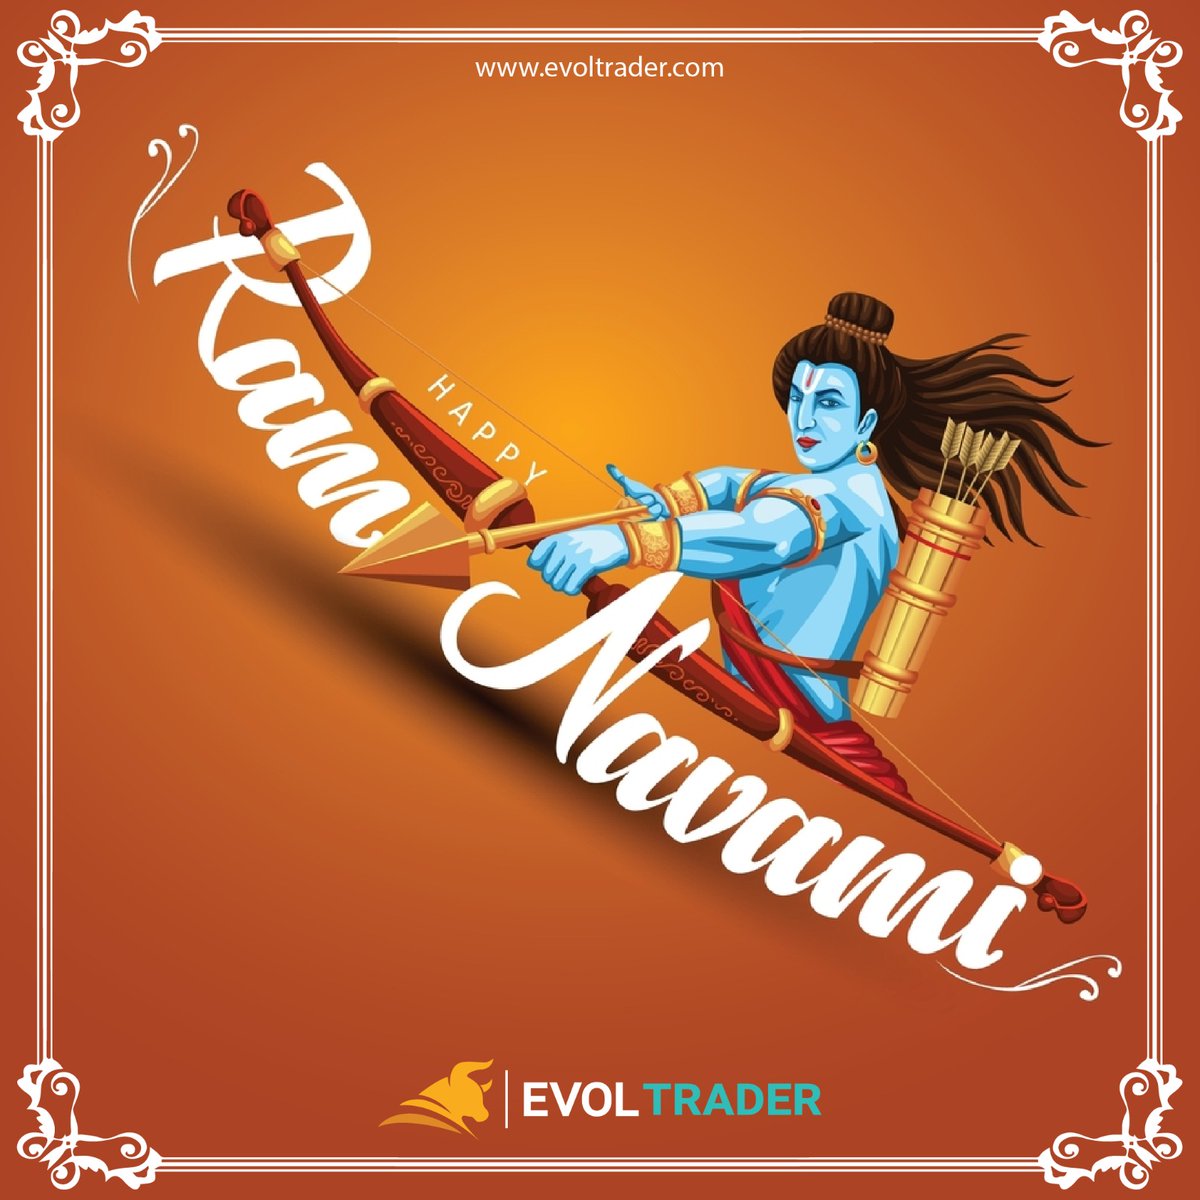 Wishing you and your loved ones a heartfelt Ram Navami filled with devotion, peace, and prosperity. May the blessings of Lord Ram bring happiness and success to your life. Happy Ram Navami! 🌼🙏🏹
.
.
#happyramnavmi #evoltrader #evolgroup #ramnavmi2024 #JoyfulCelebration